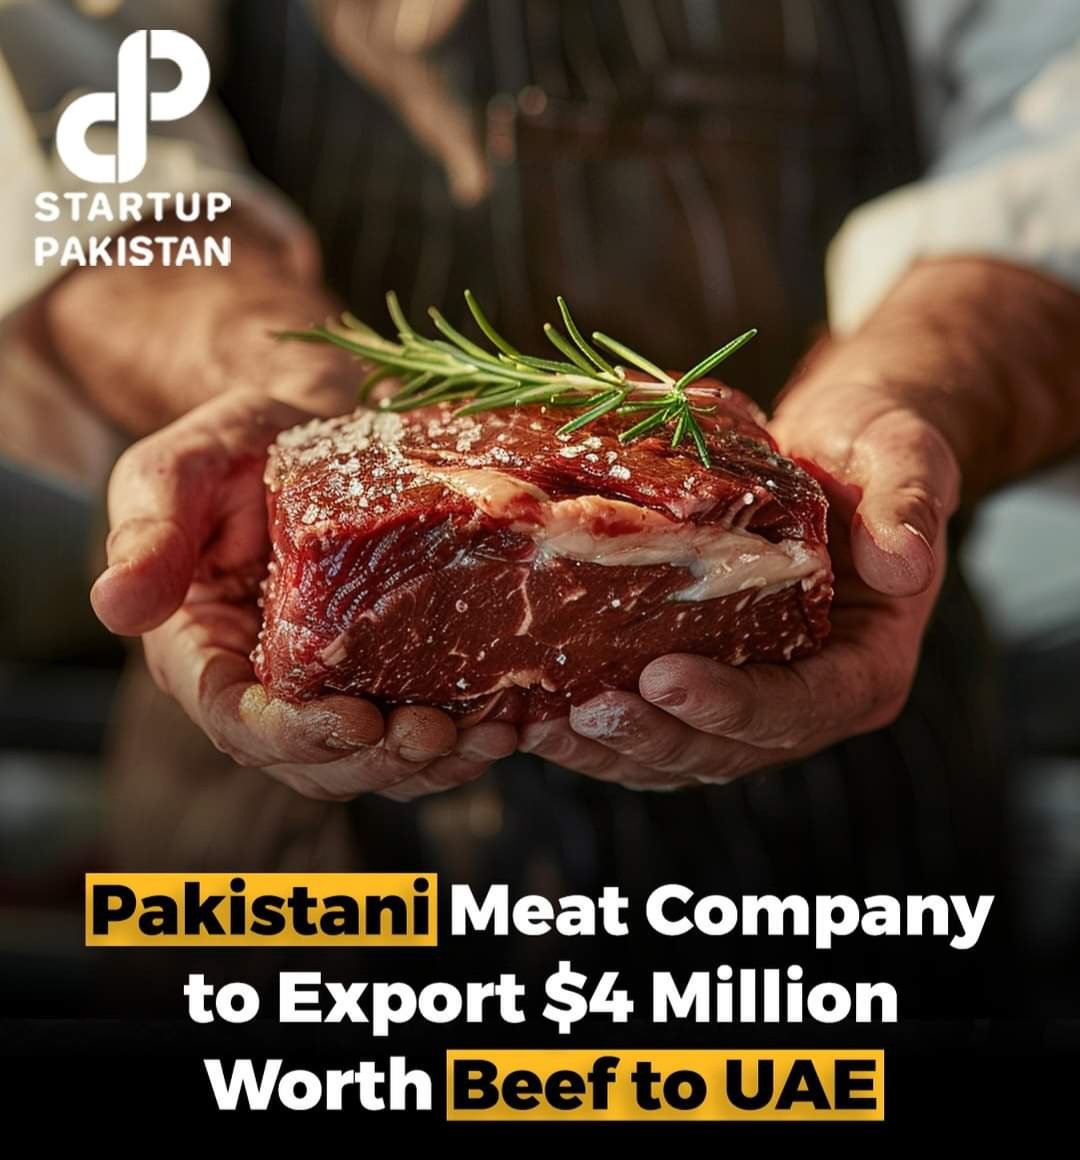 Pskistsn is big country export meat